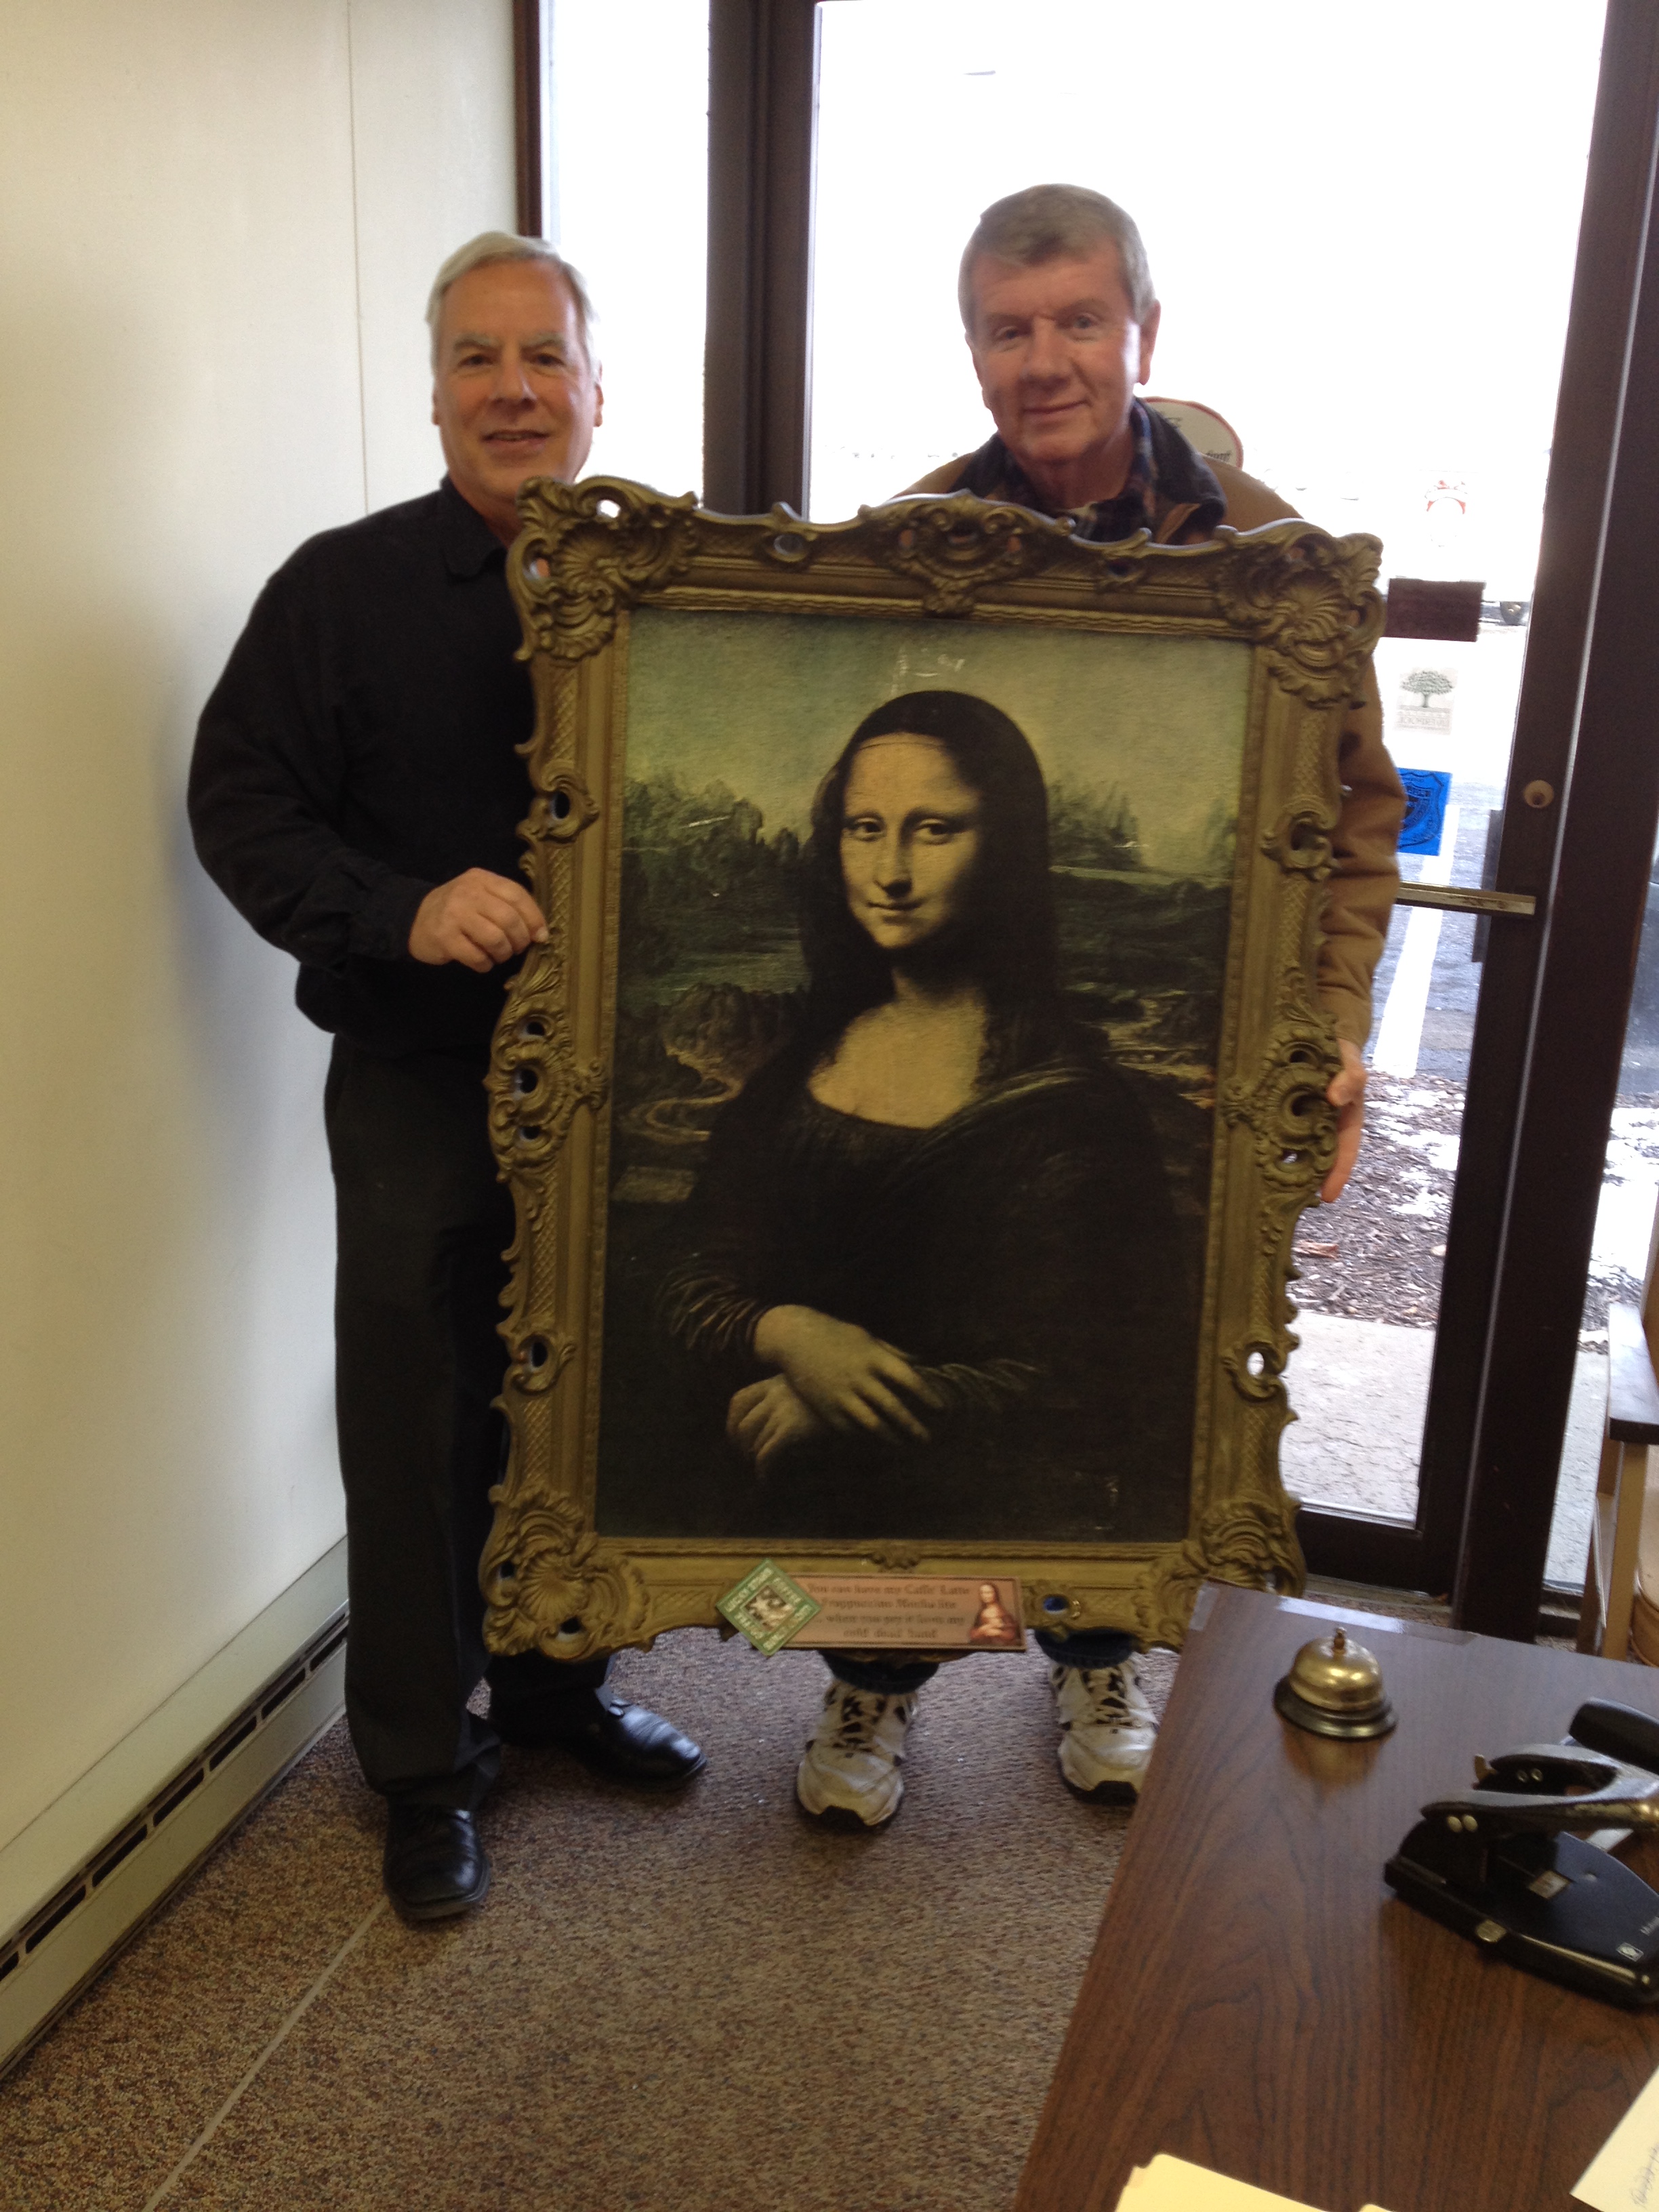 We were honored to receive a visit from the "Mona Lisa" today!  Thank you to our client Tom Barry (pictured right) for a view of his "one-of-a-kind" masterpiece.